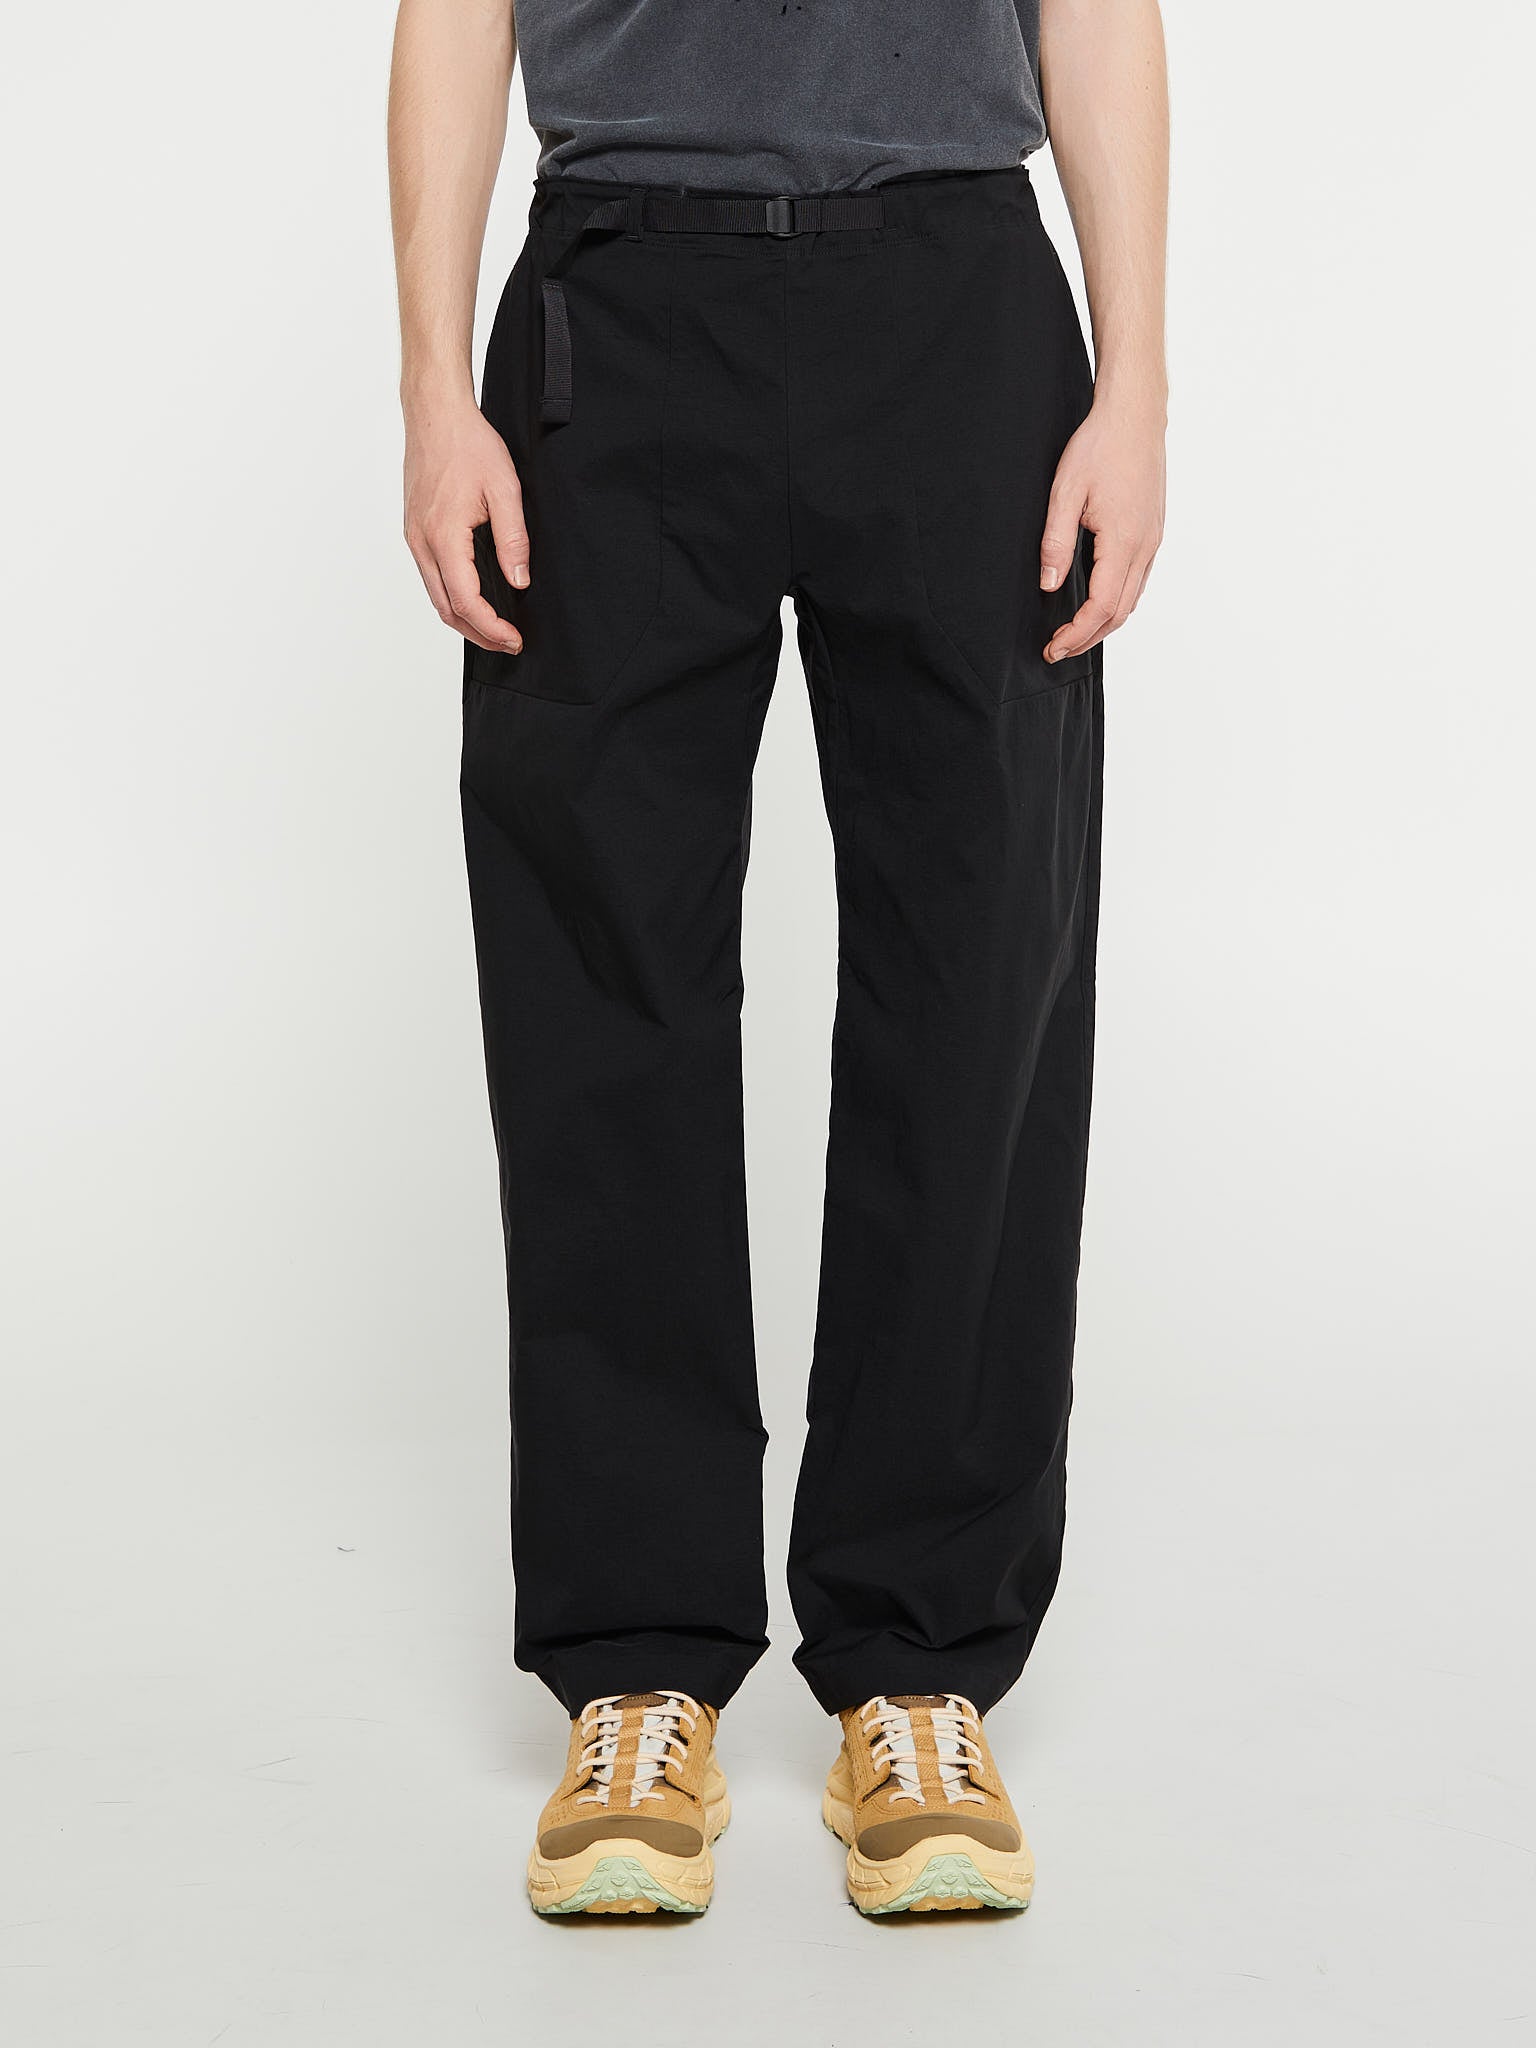 Easy Technical Pants in Black and Grey